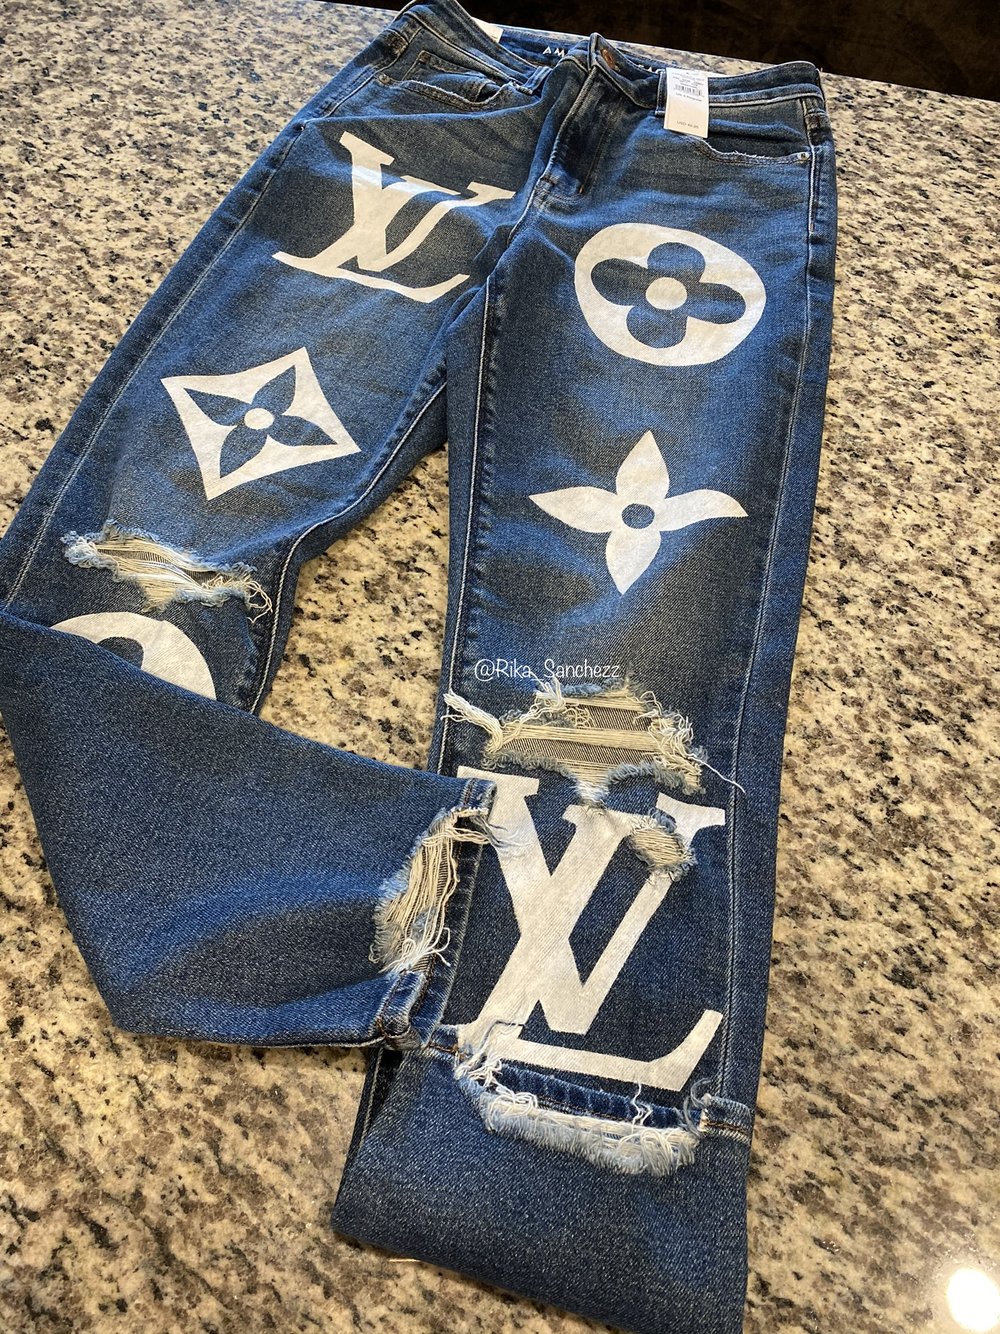 LV bleached jeans  Bleach jeans diy, Bleached jeans, Painted